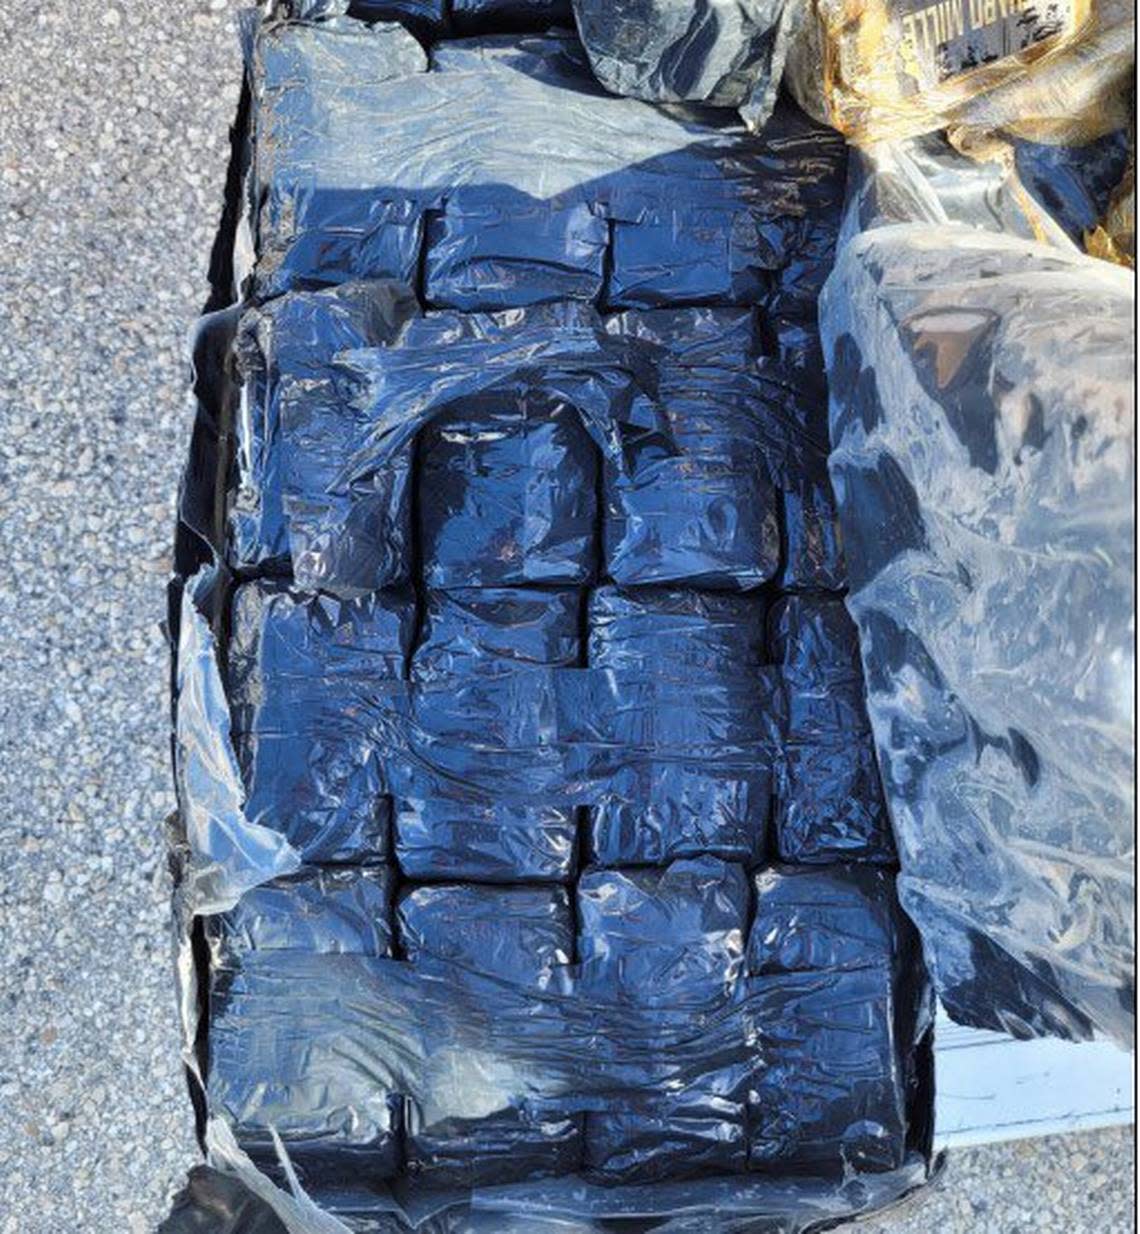 A large amount of bundled hashish is displayed. The drugs were found by a boater off the Florida Keys Sunday, July 2, 2023, according to the U.S. Border Patrol.